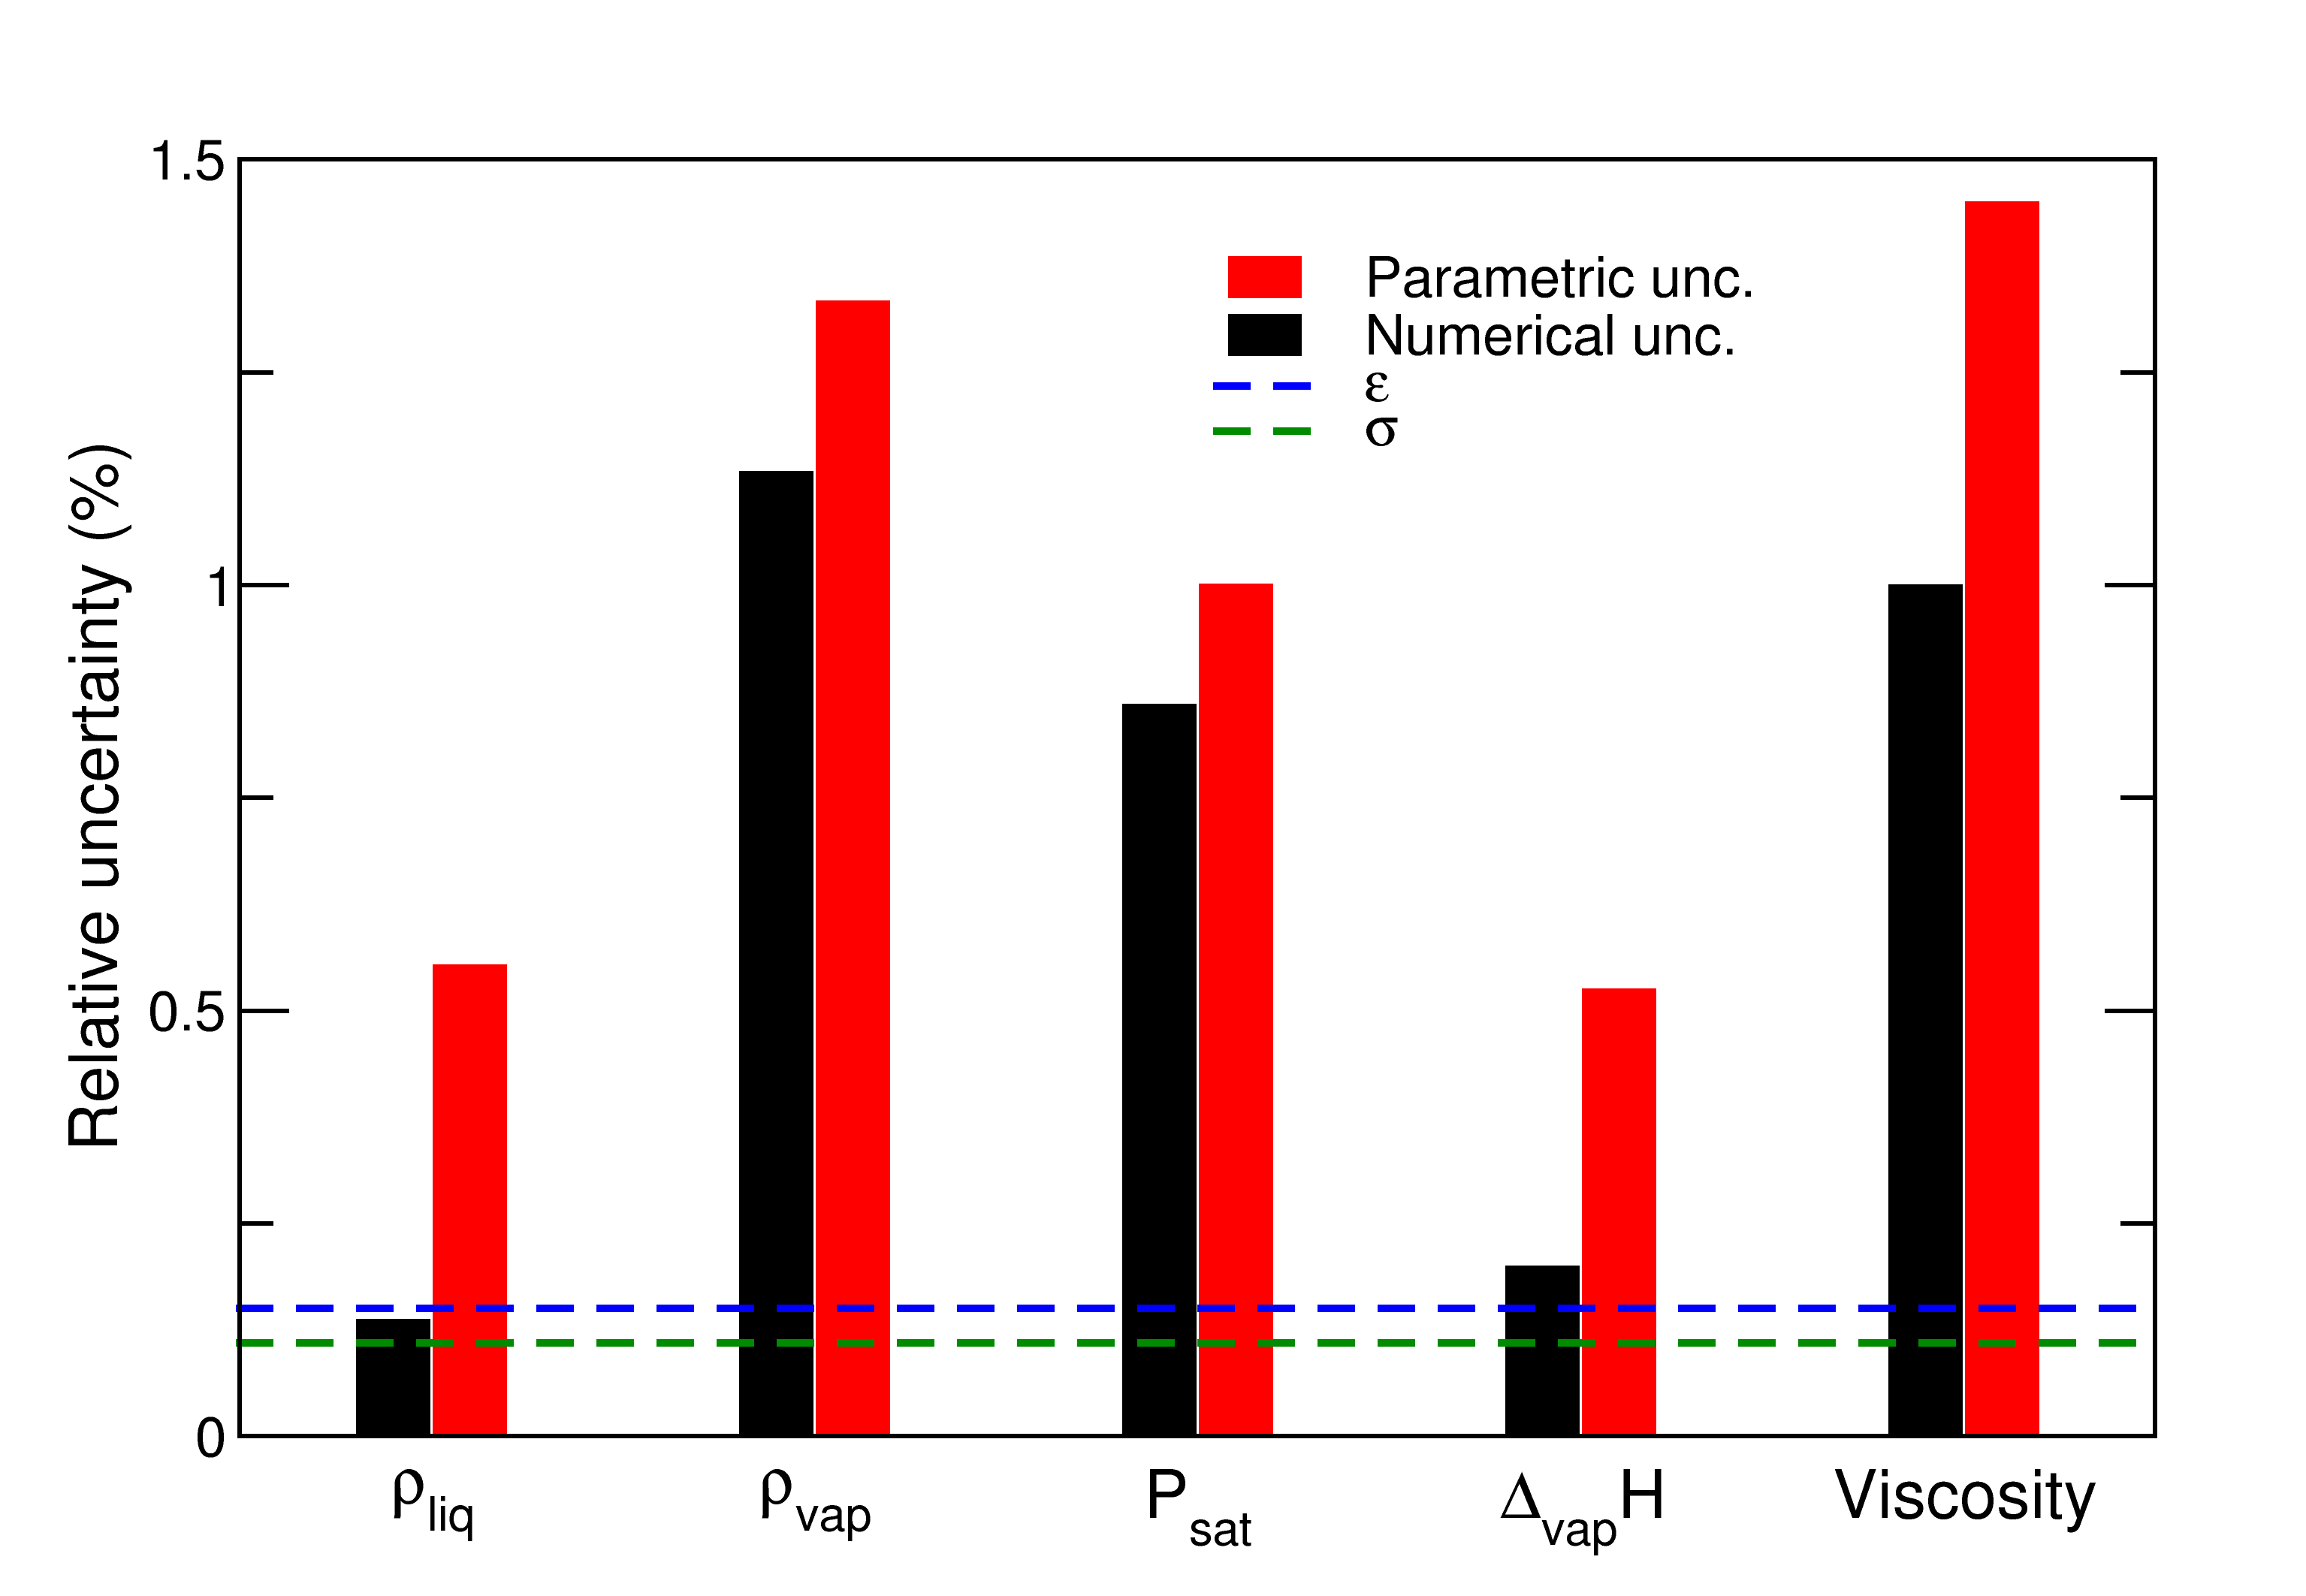 Total uncertainty budget for various properties of argon obtained with molecular simulation